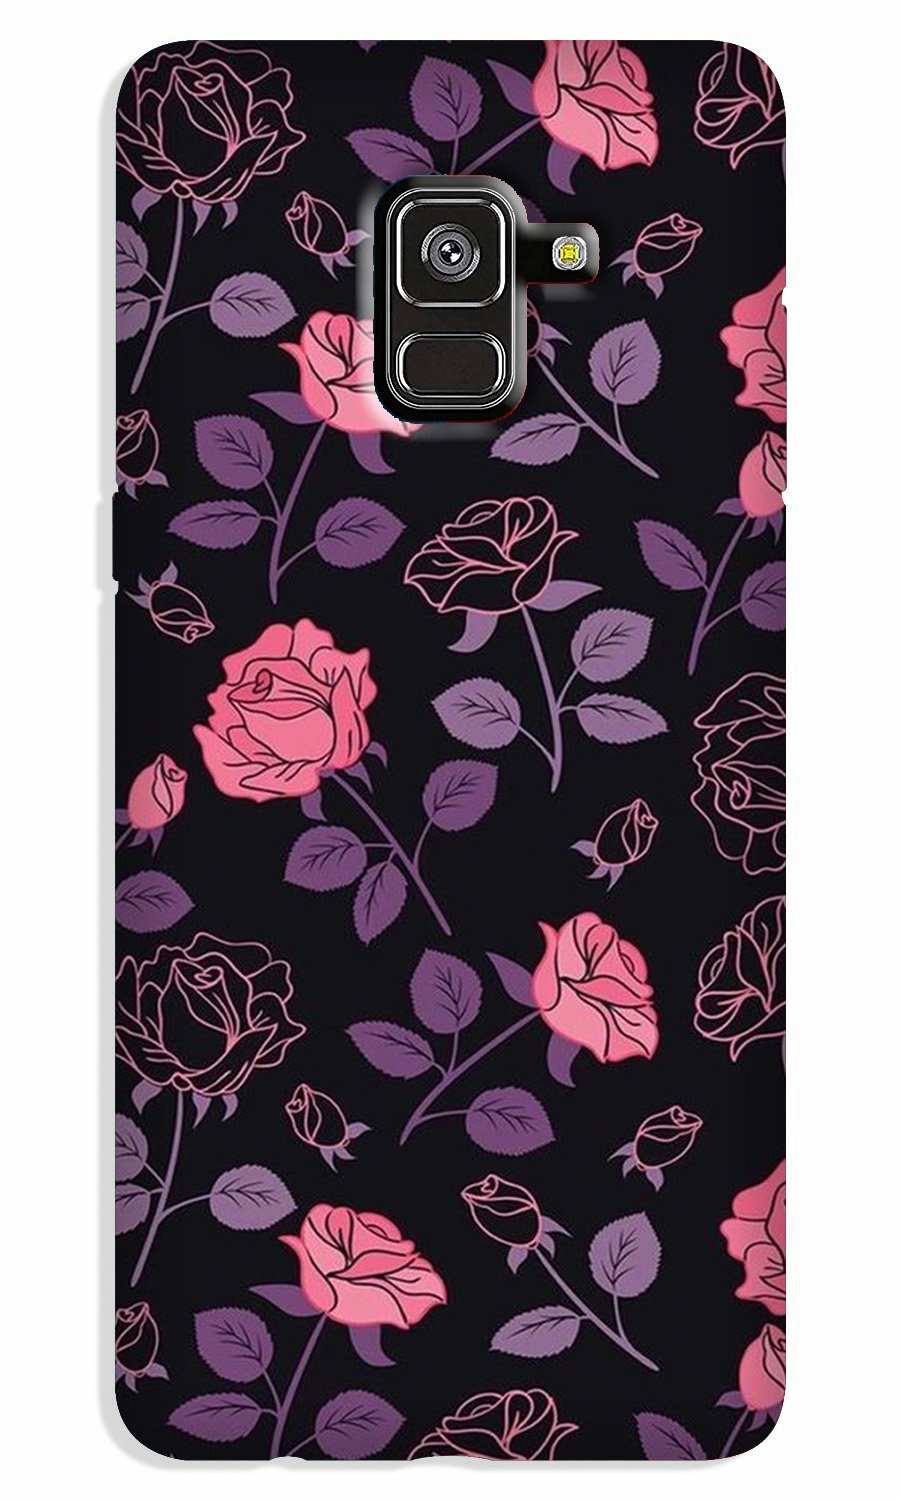 Rose Black Background Case for Galaxy J6 / On6